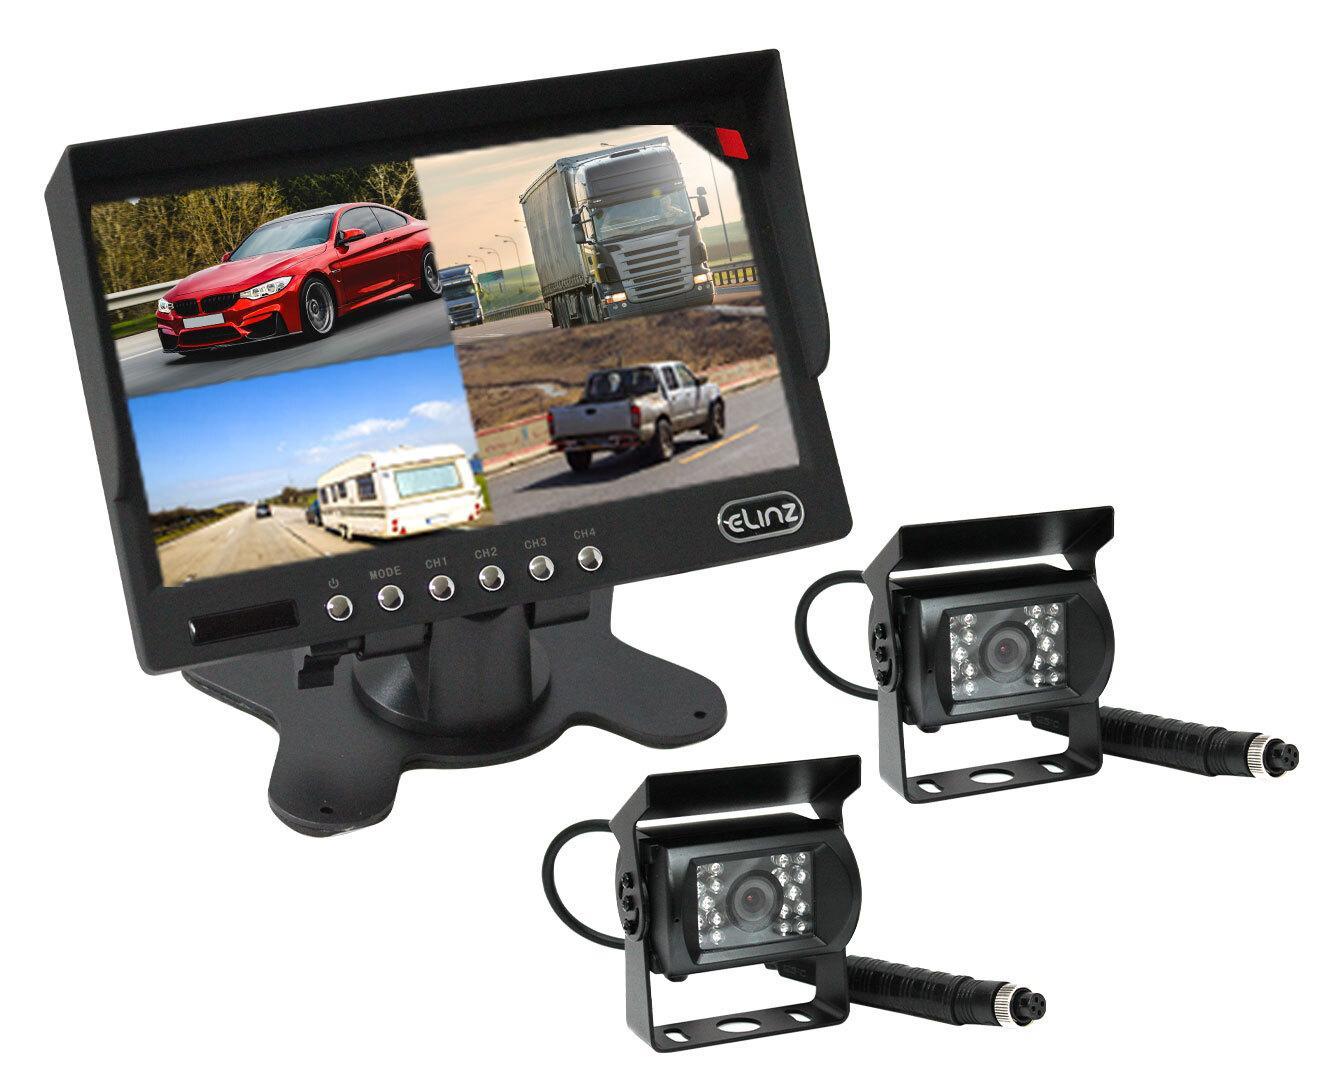 Elinz 7" Quad Monitor Splitscreen with 2 Camera Package